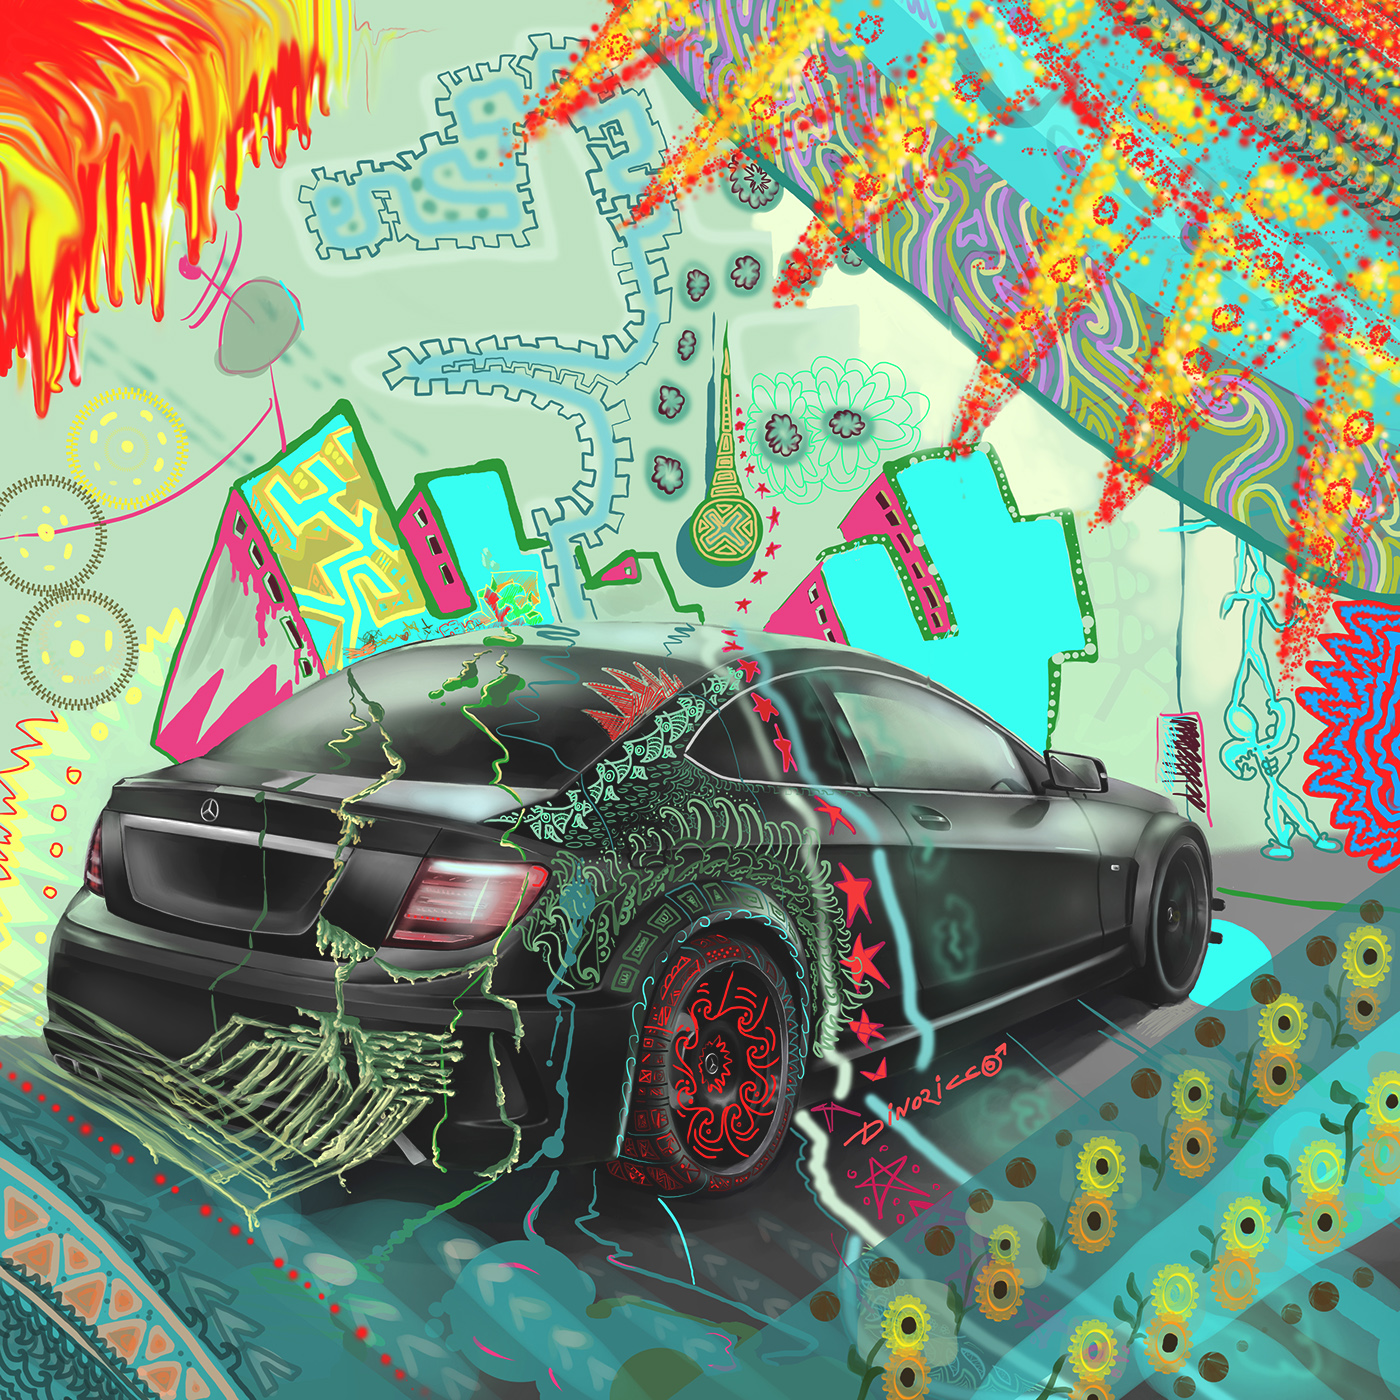 car Benz rebel mercedes Motor Vehicle sport Racing abstract #Ps25Under25 pattern fire angry Ps25Under25 vivid